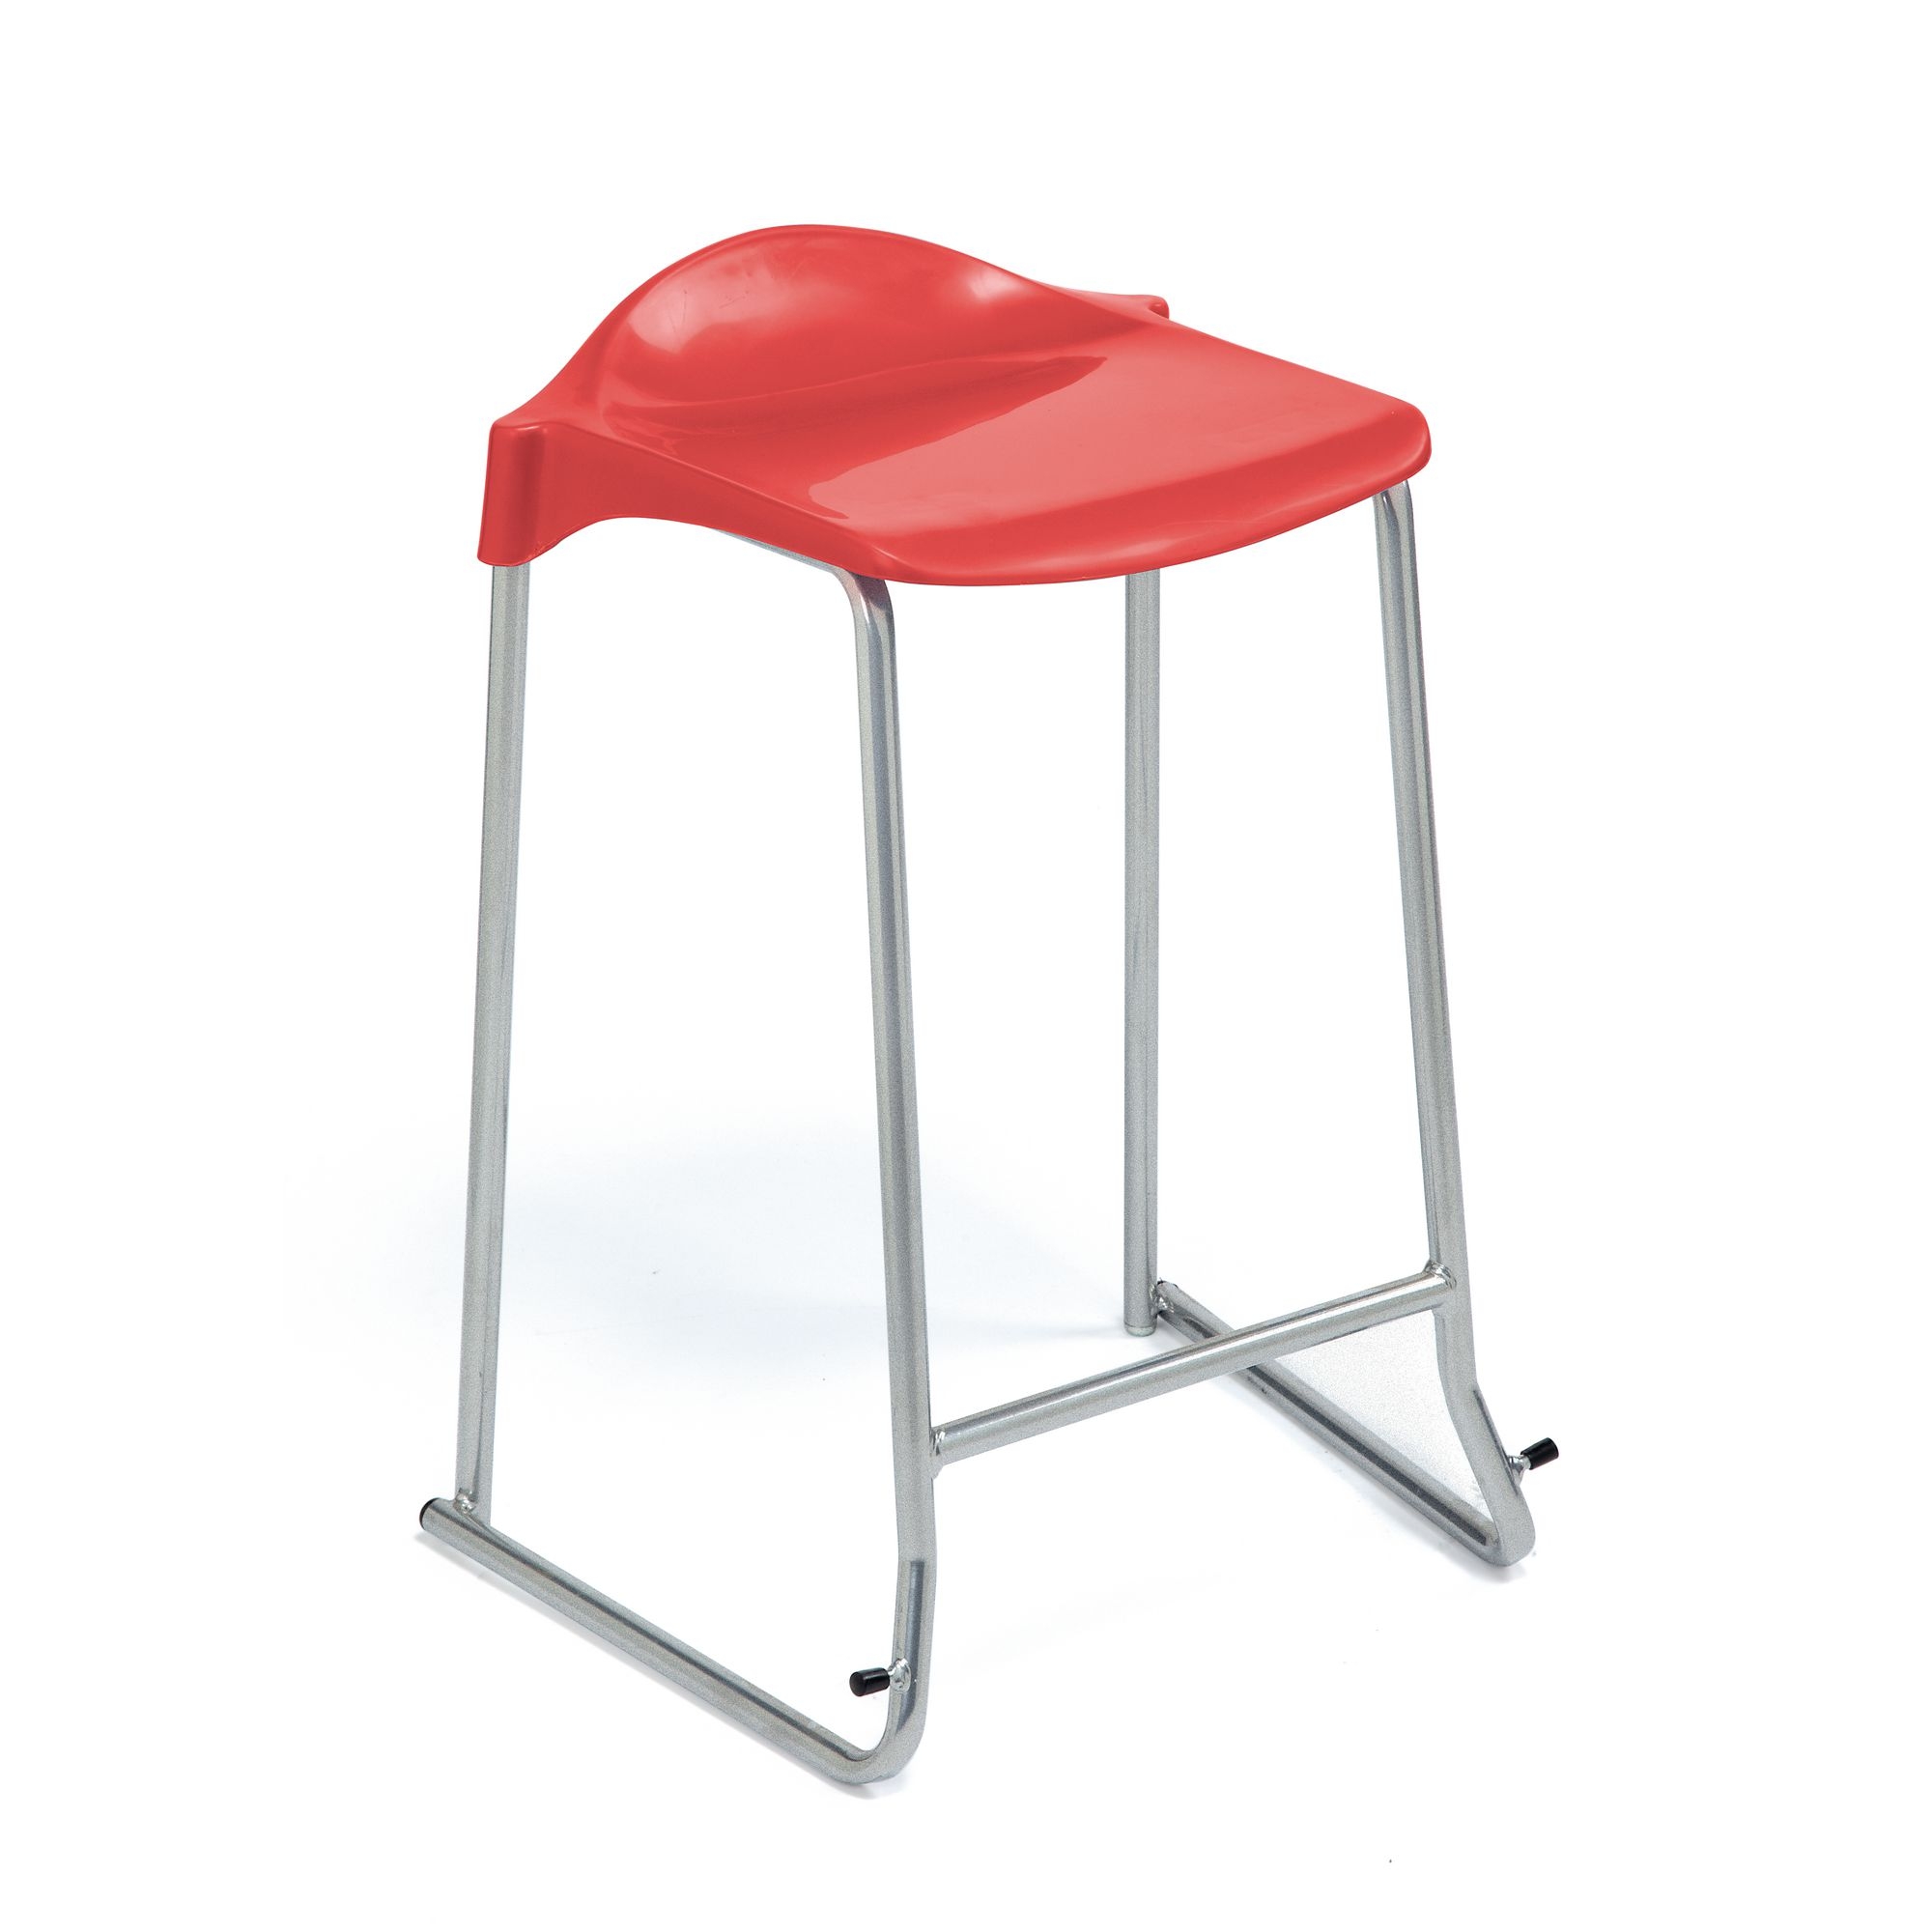 WSM Skid Base Stool - Seat height: 685mm - Charcoal